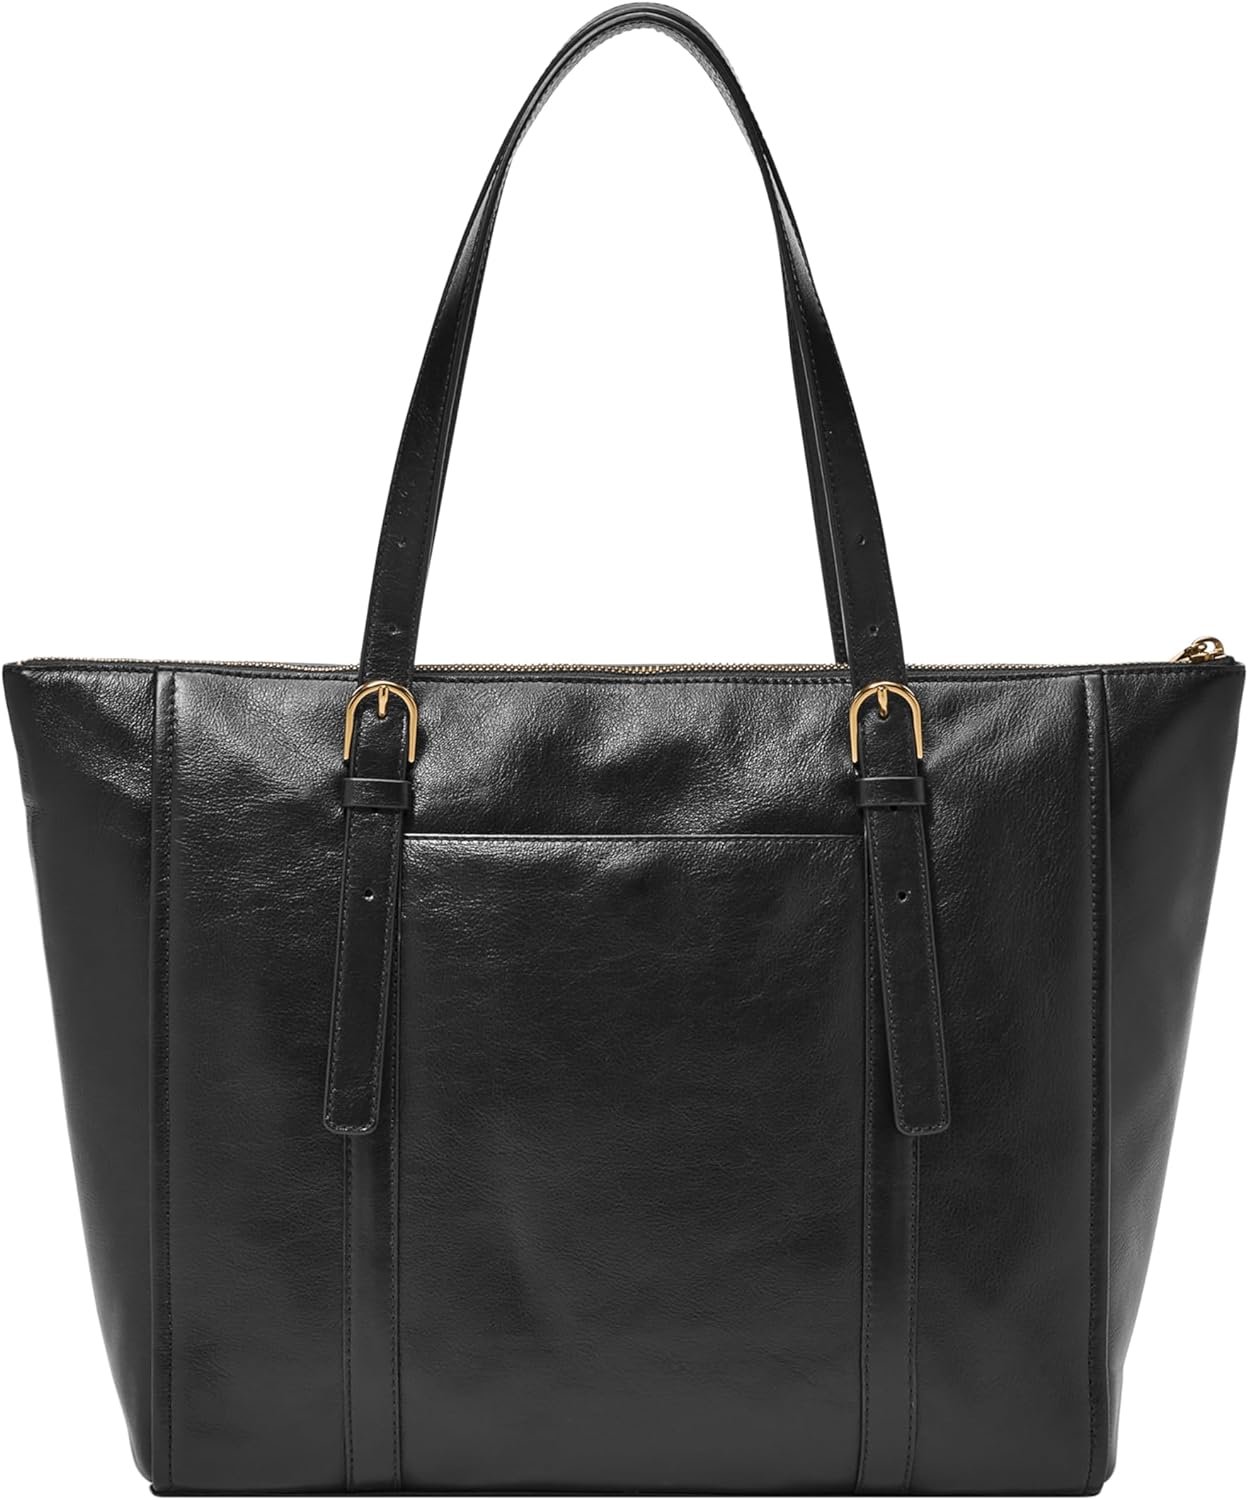 Fossil Carlie Leather Tote Bag Review